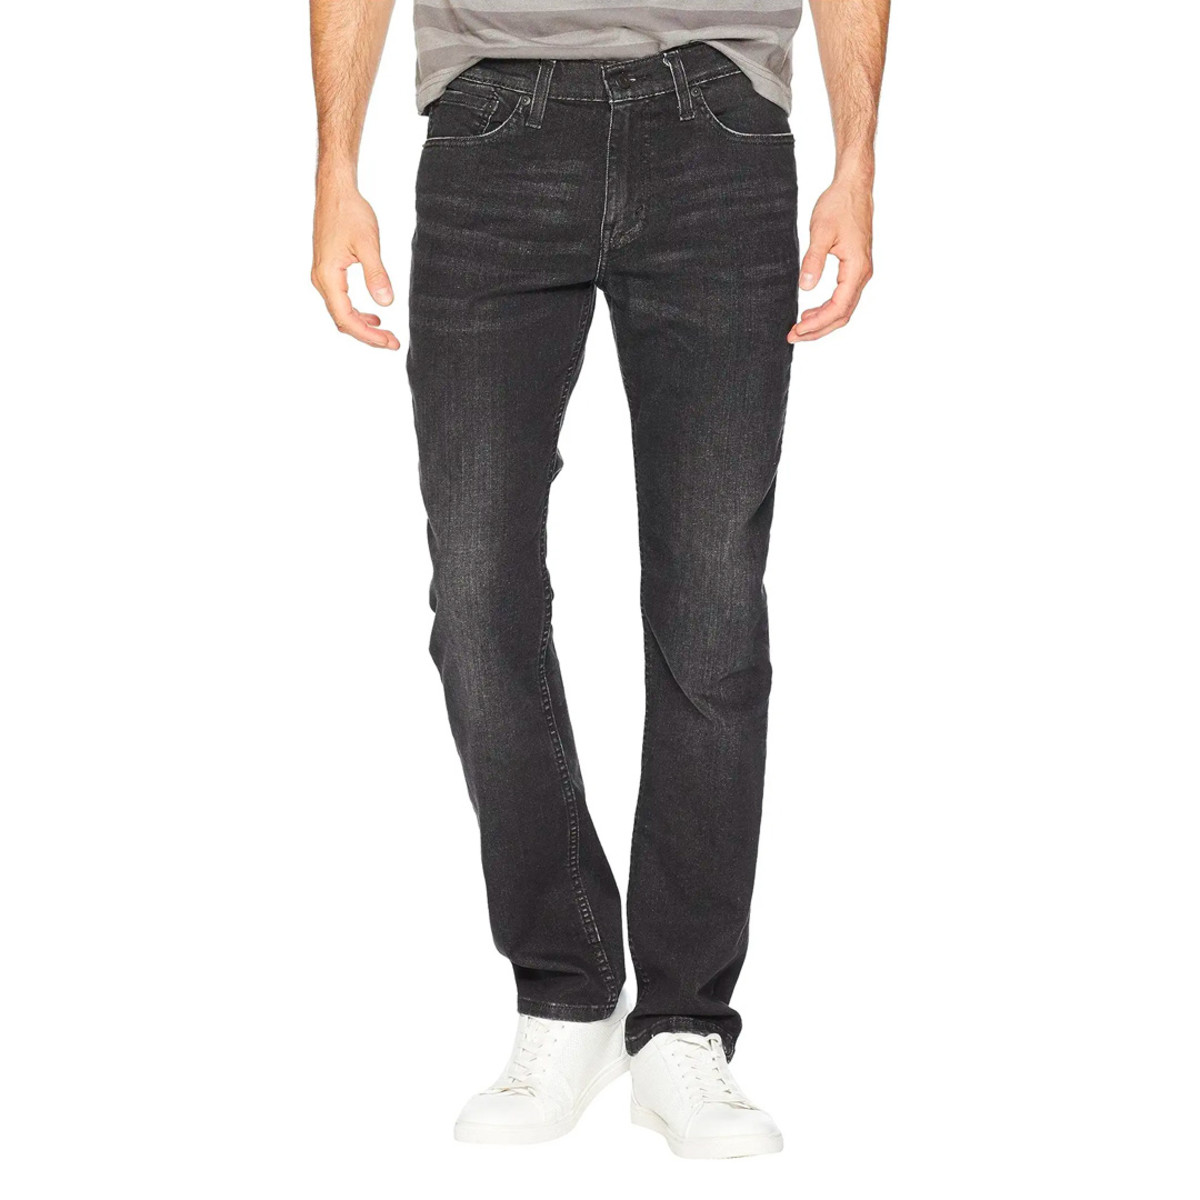 The Levi’s 511 Jeans Are Now Up to 60% Off at Zappos - Men's Journal